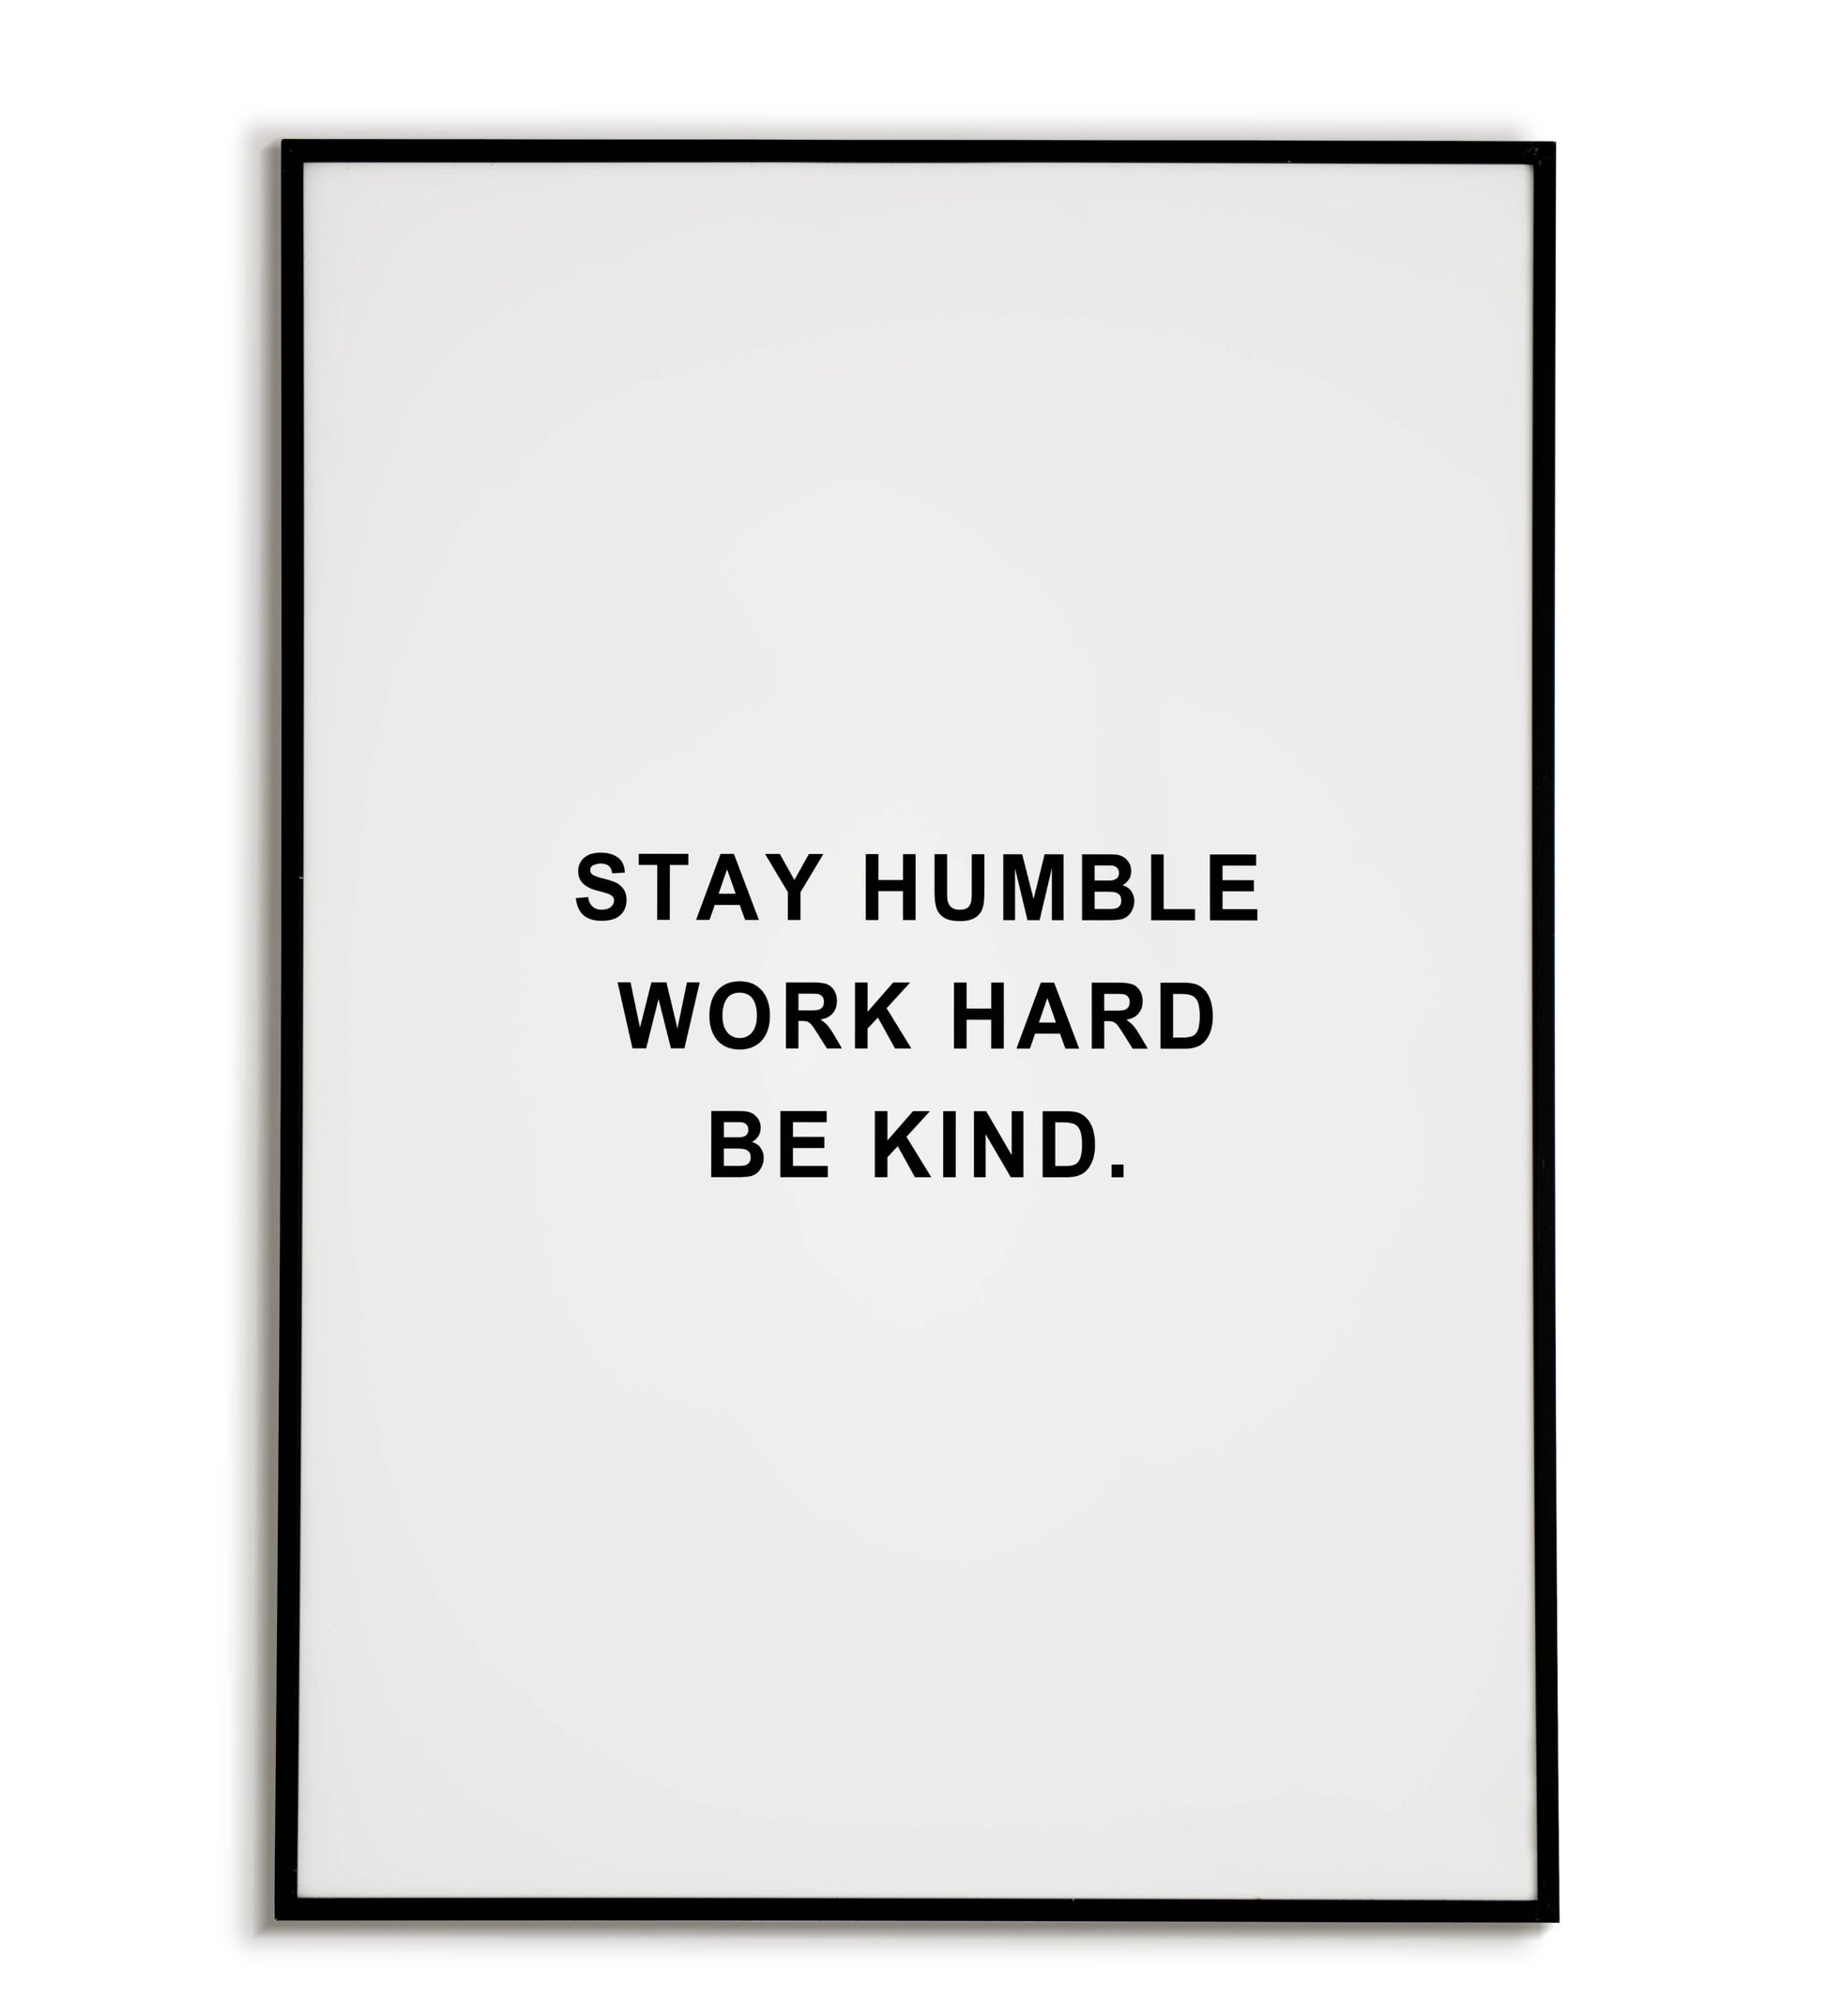 Stay Humble Work Hard Be Kind printable wall art poster. Inspirational message about virtues